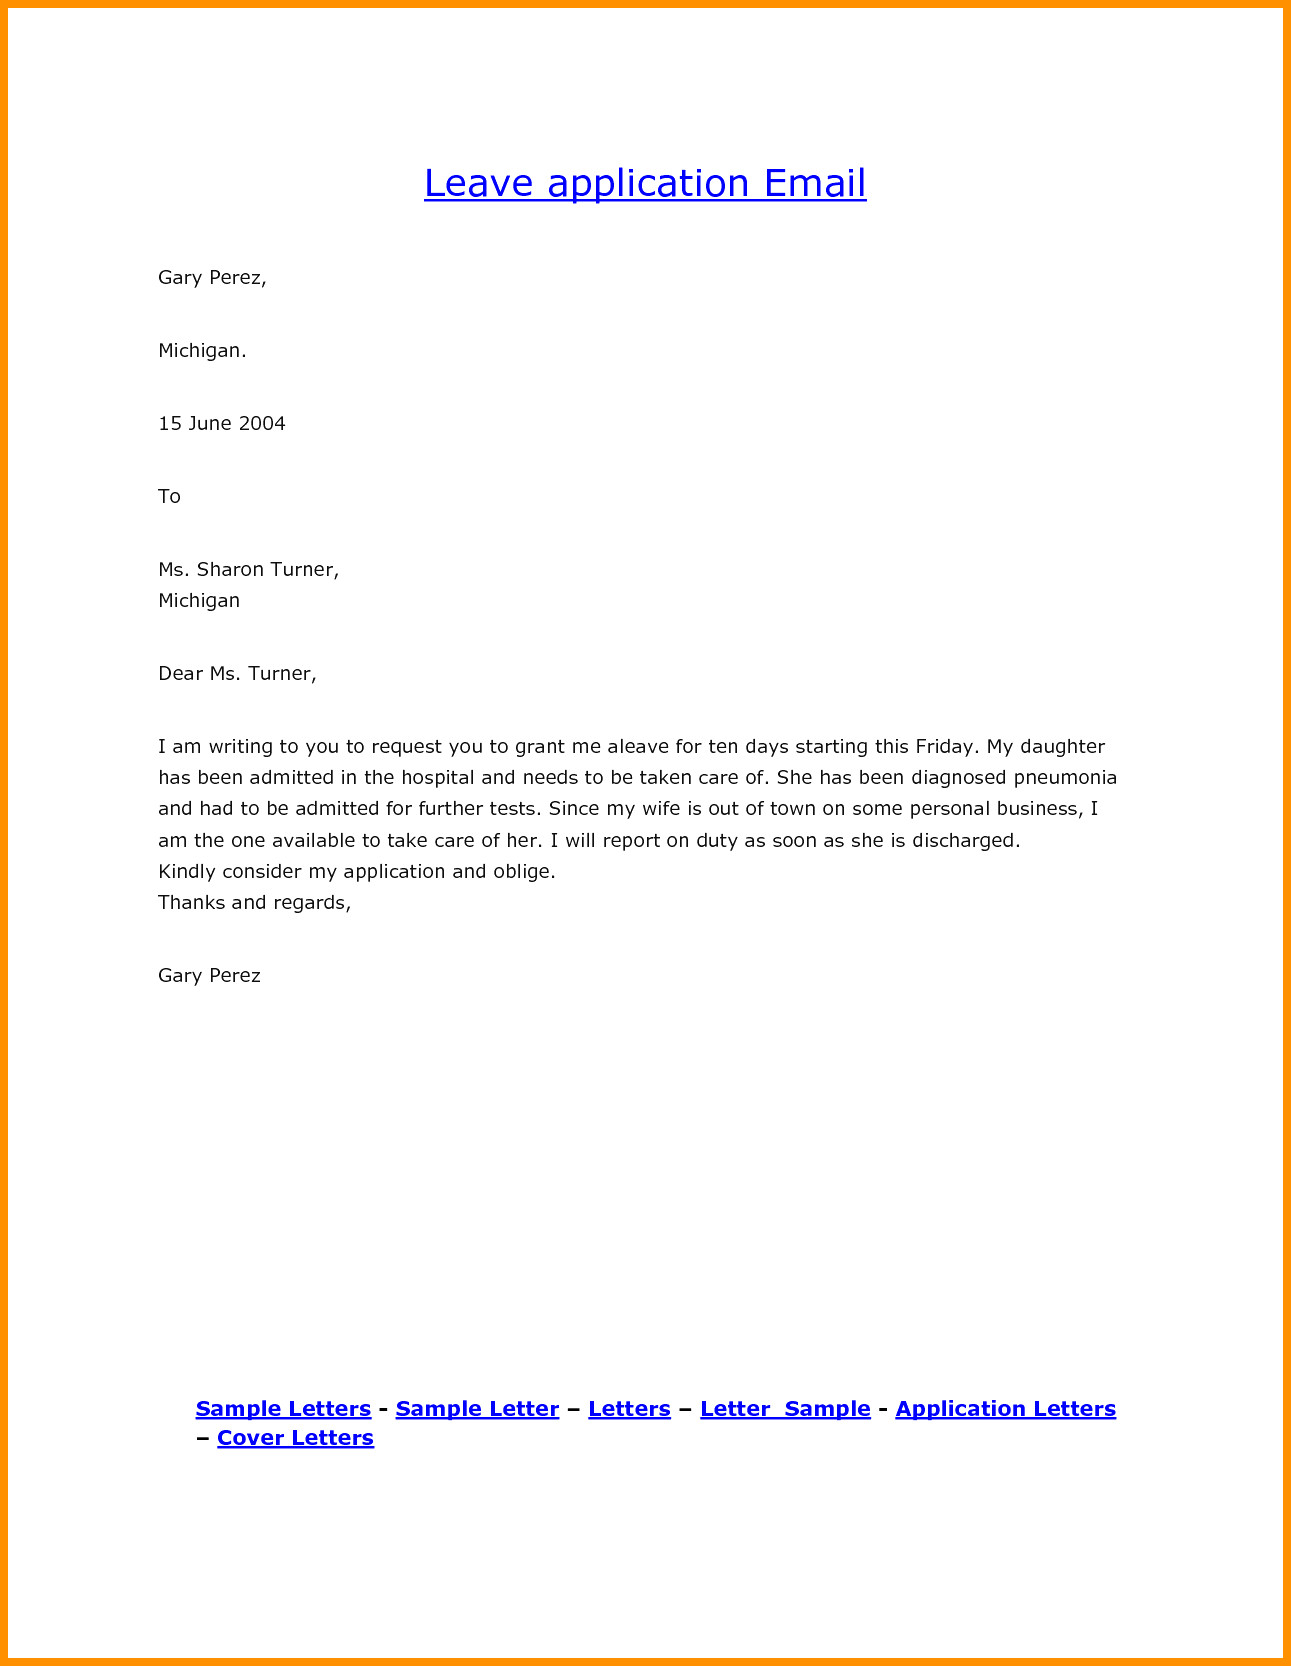 Leave Request Mail To Manager – band ible